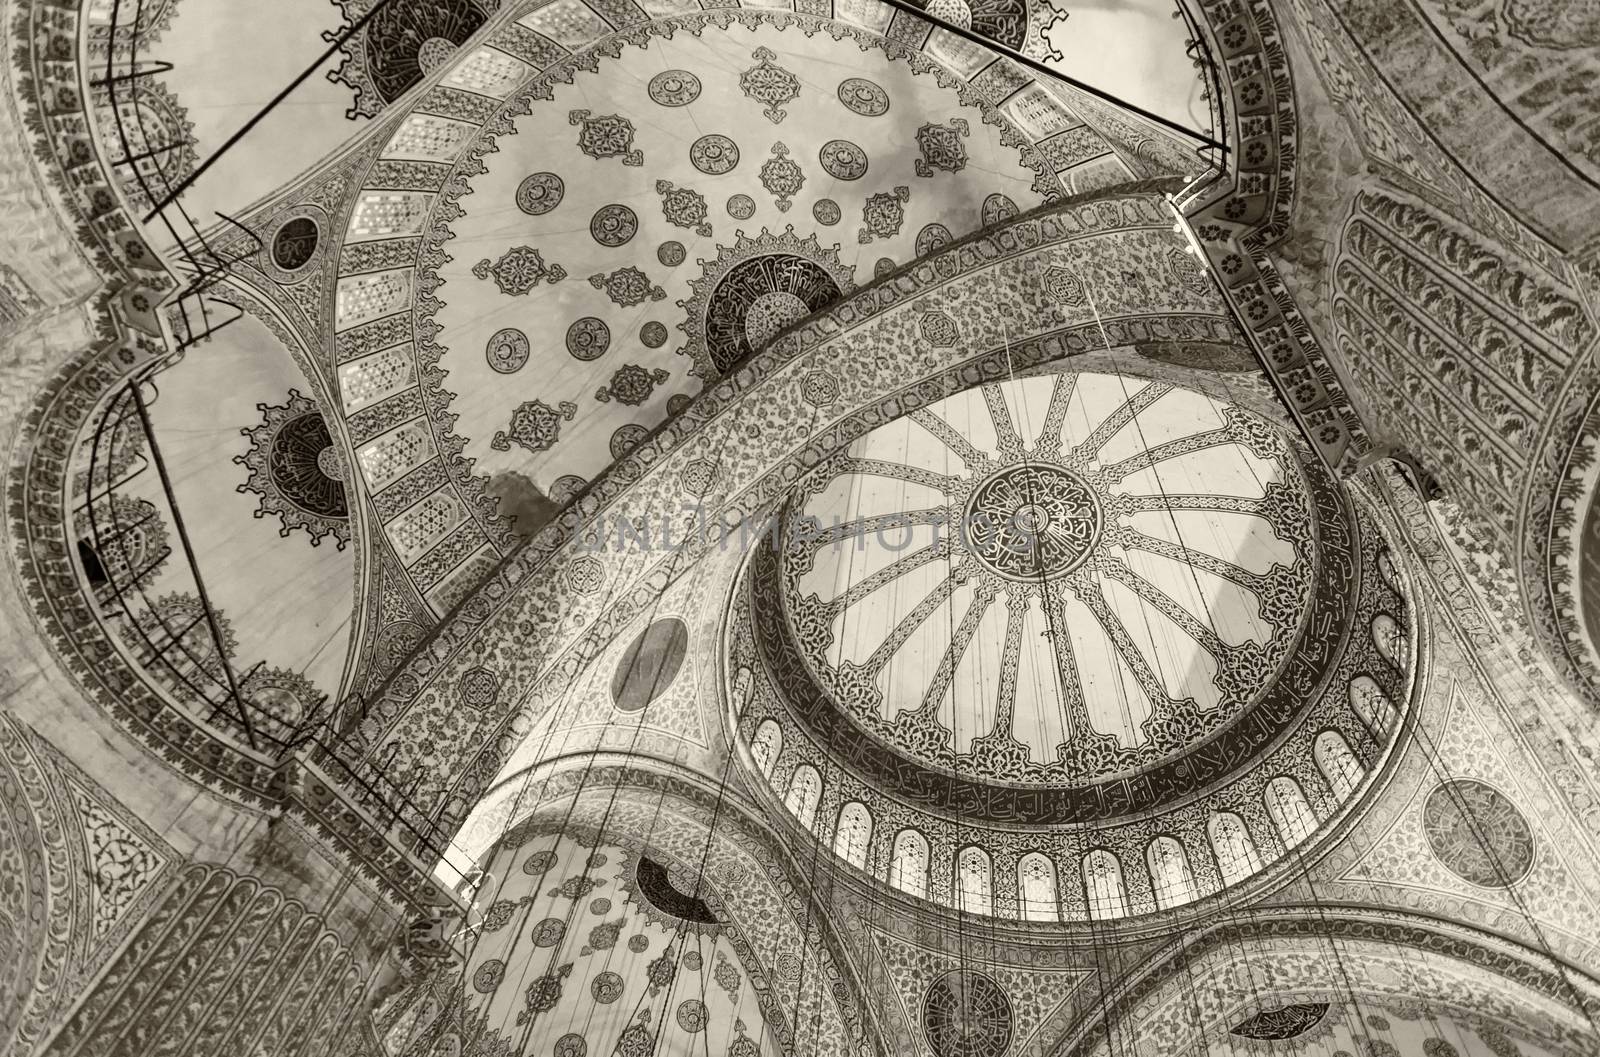 ISTANBUL - SEPTEMBER 20, 2014: Interior of Blue Mosque. The Mosque is the most visited landmark of Istanbul.